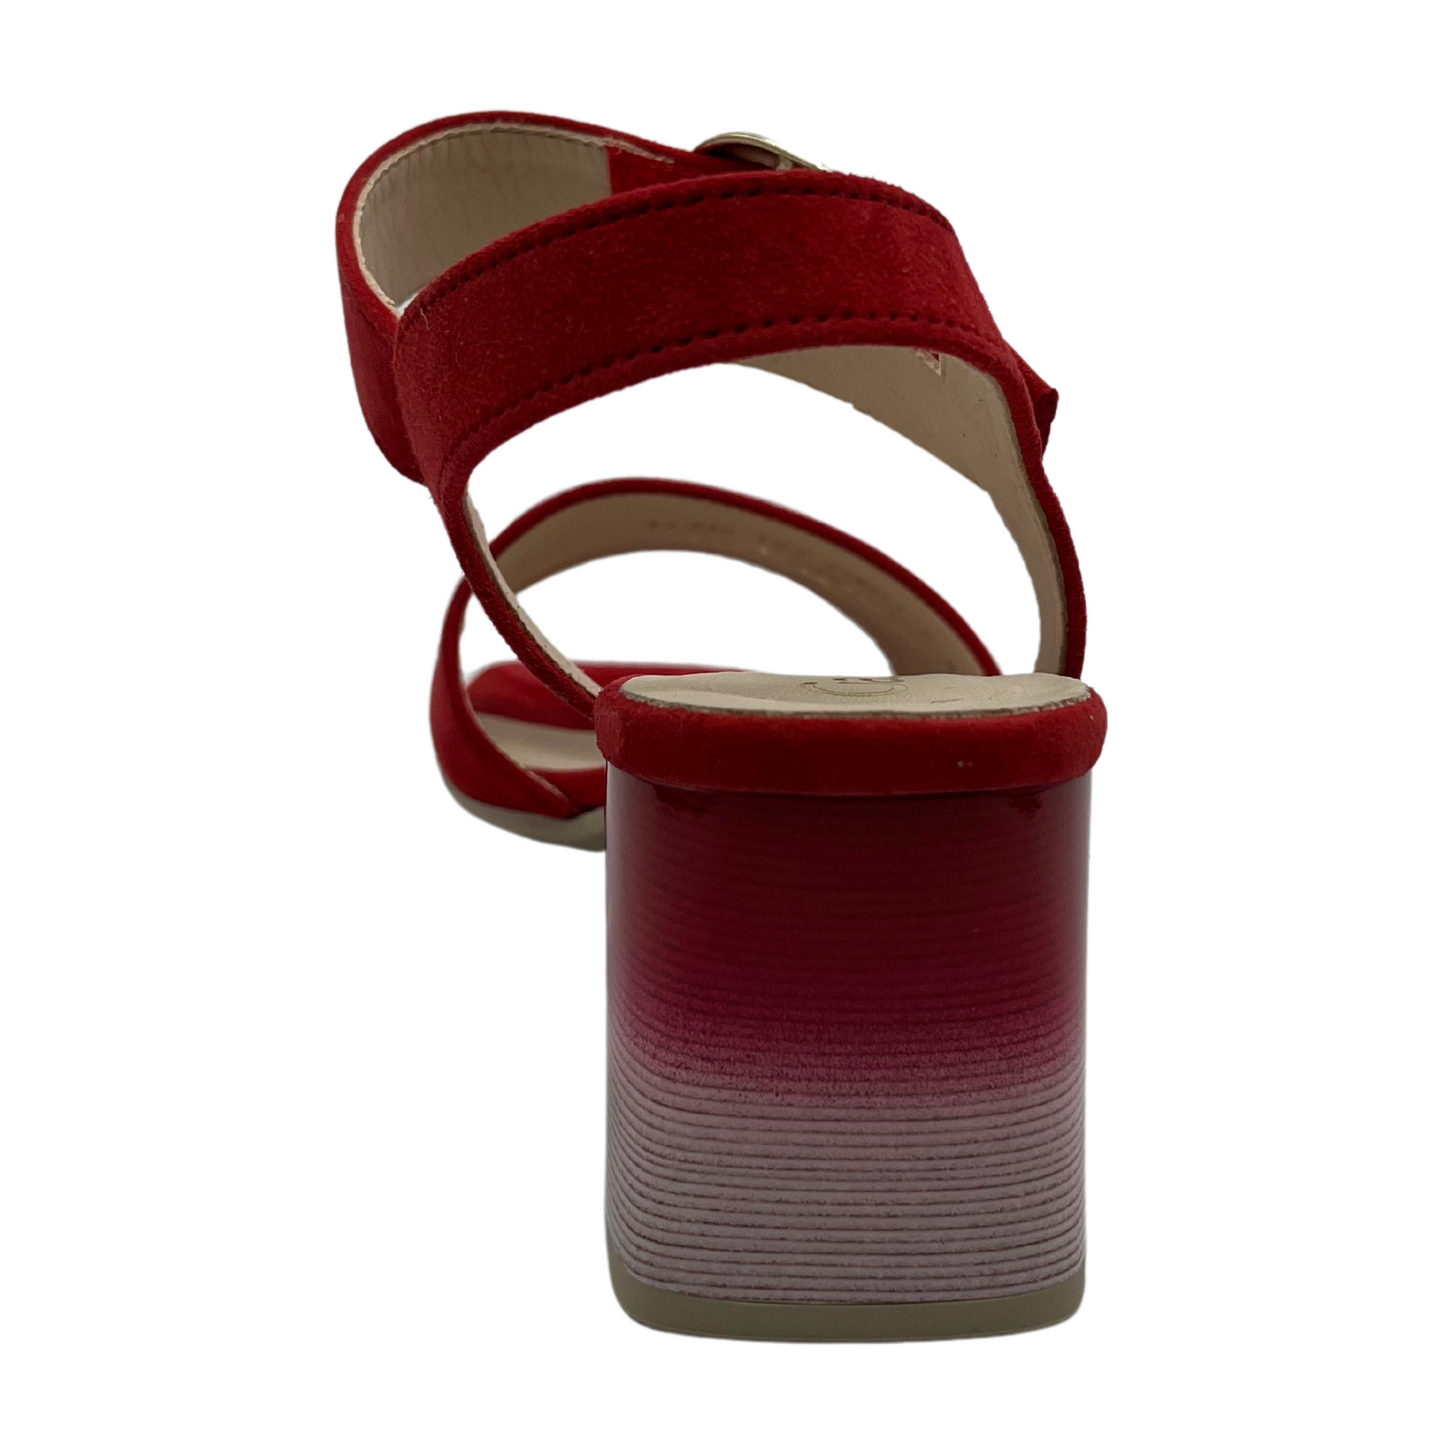 Back view of red high heeled sandal with soft square toe and silver buckle on the strap